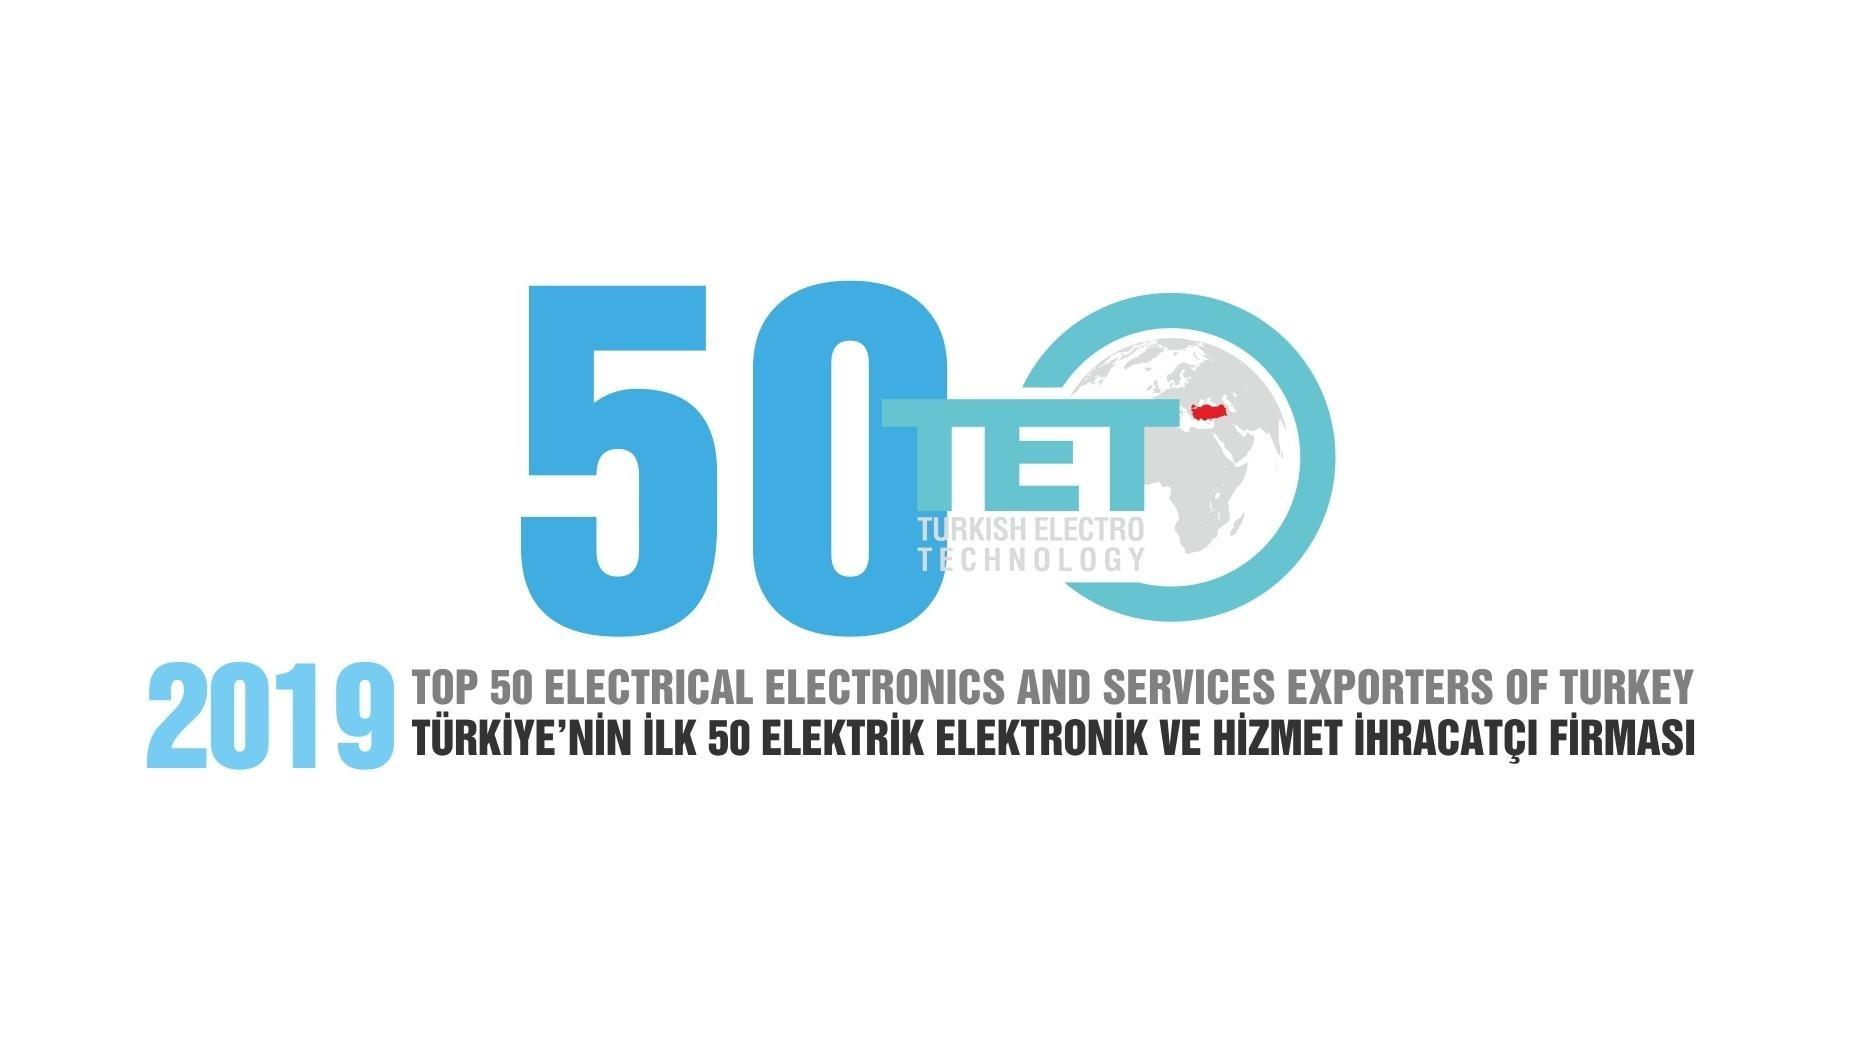 We are happy to inform you that EMSA was awarded as one of the TOP 50 ELECTRICAL, ELECTRONICS AND SERVICES EXPORTERS OF TURKEY for the year 2019.